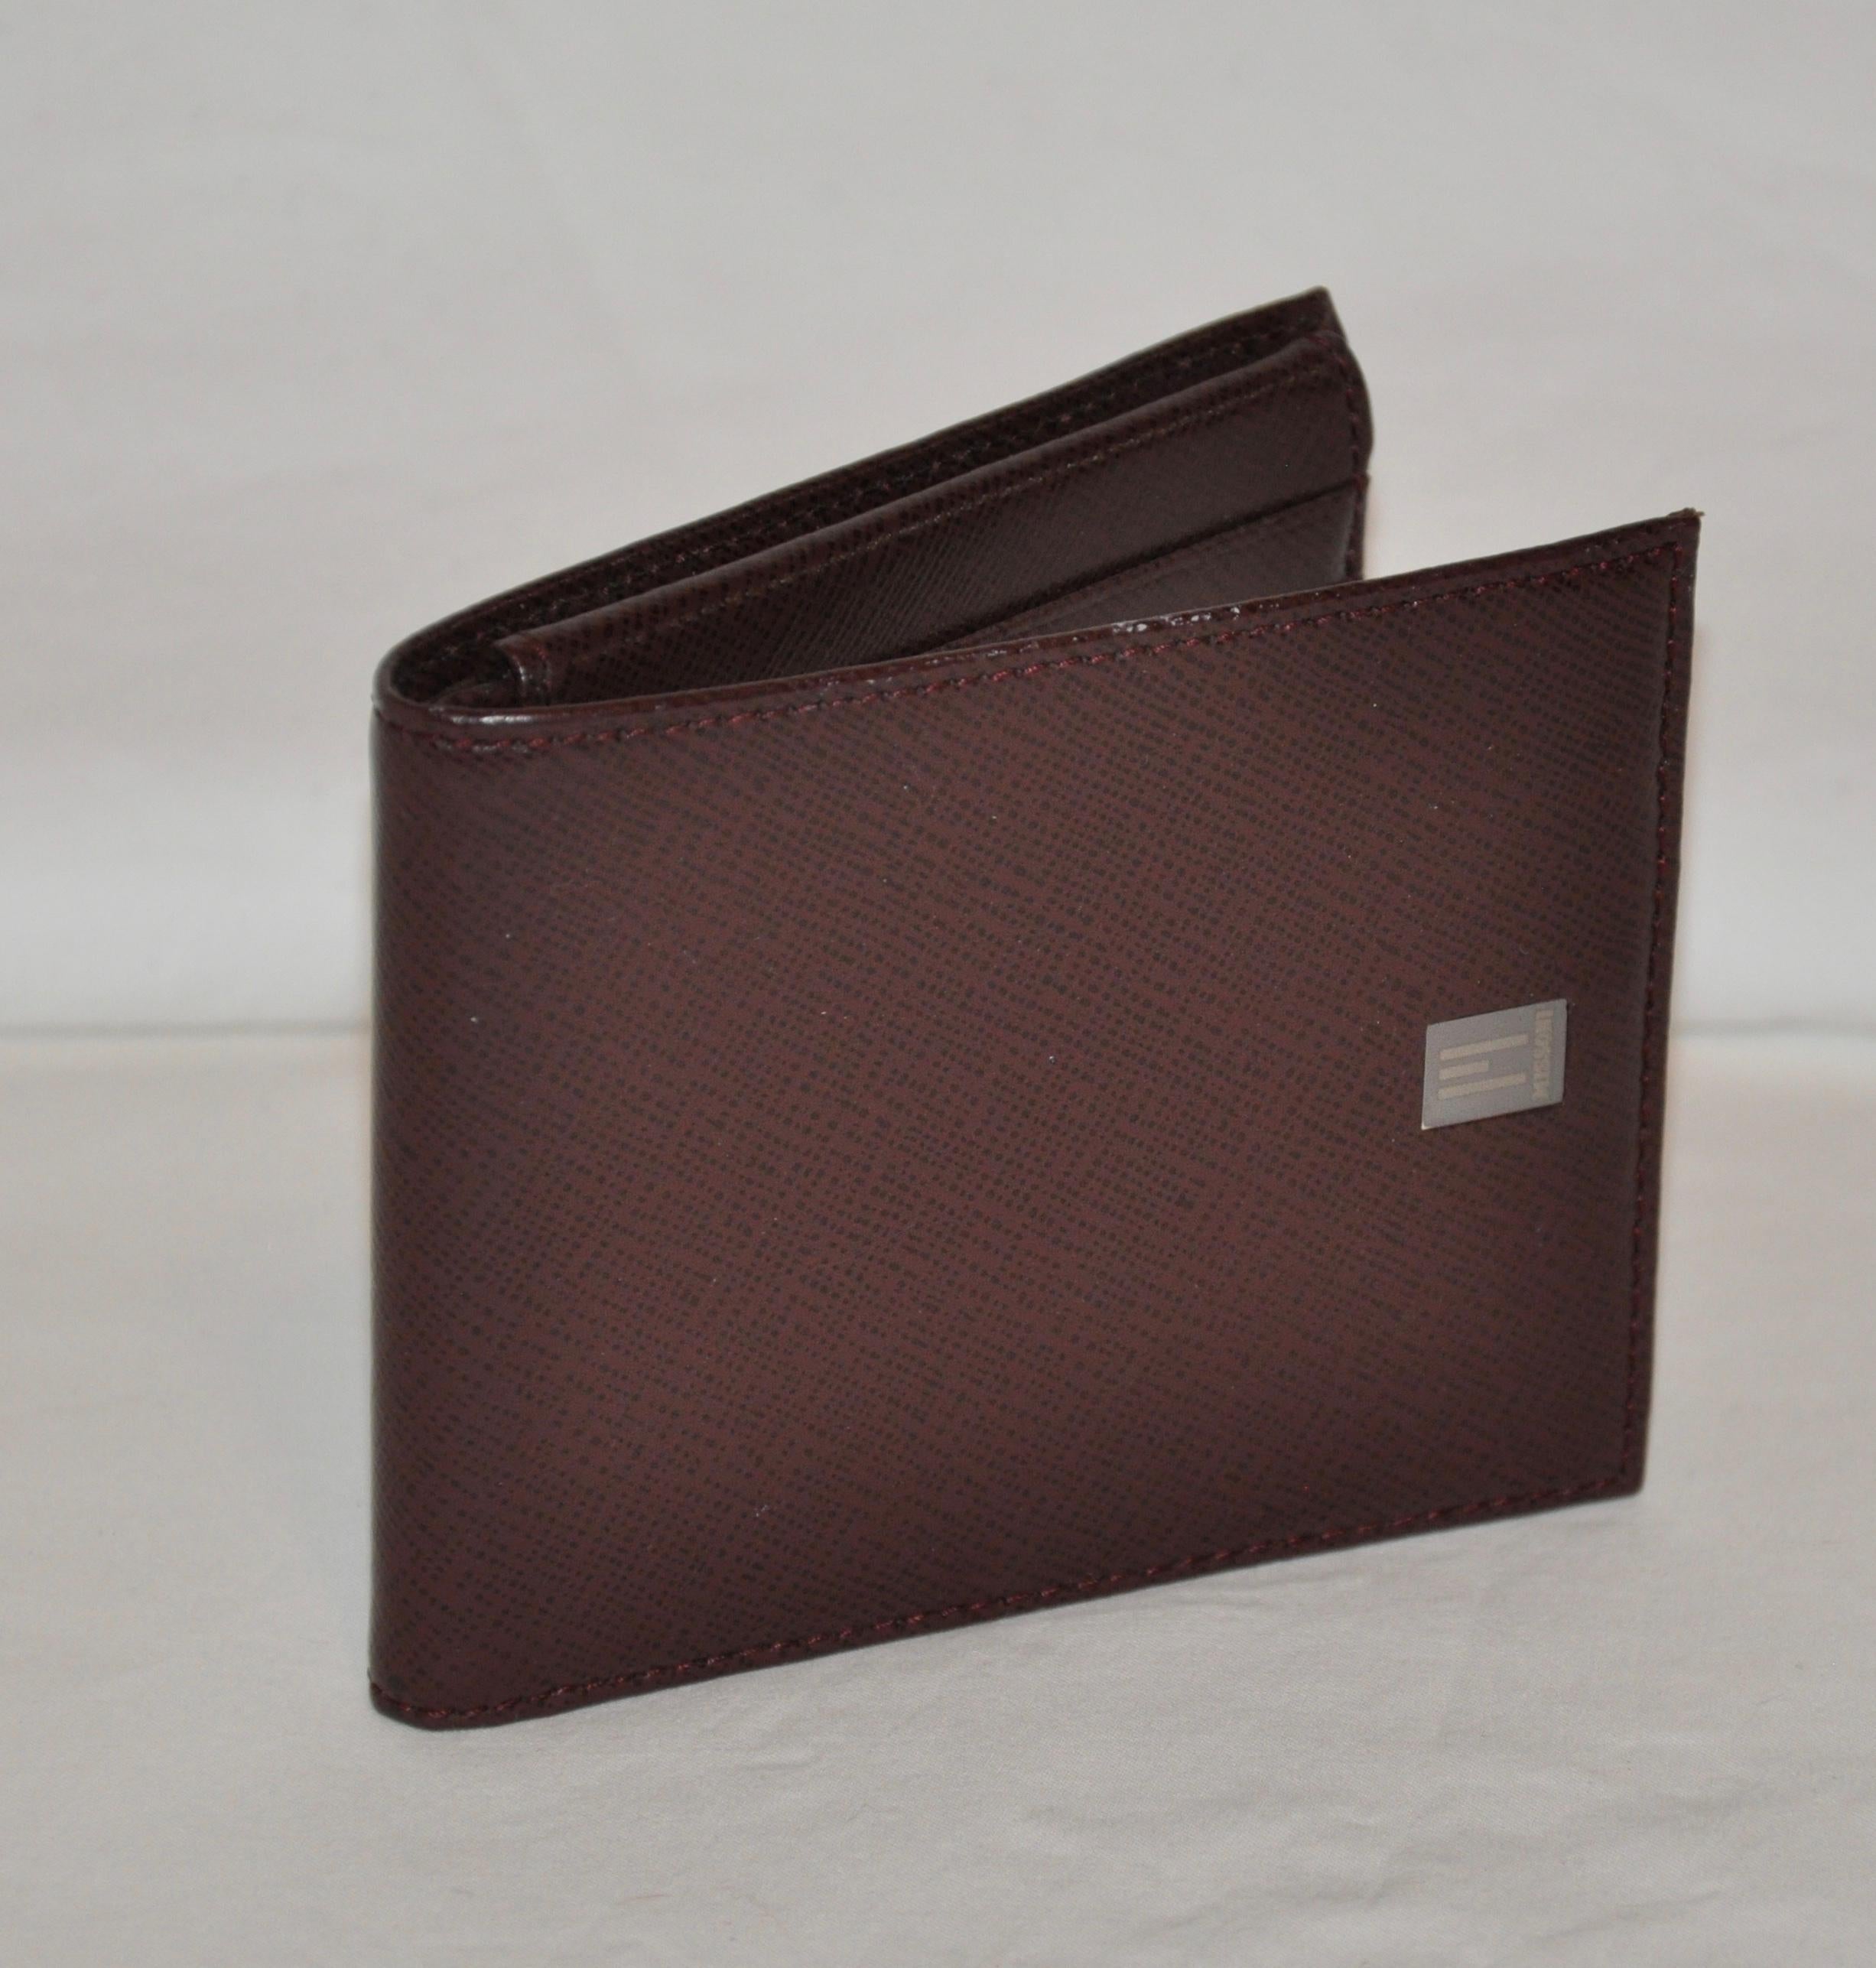 Missoni textured calfskin in brick-brown men's wallet has slots for 12 credit cards as well as a clear slot for, perhaps, a photo identification. When closed, the wallet measures 4 3/8 inches in length and 3 5/8 inches in height. Missoni's signature